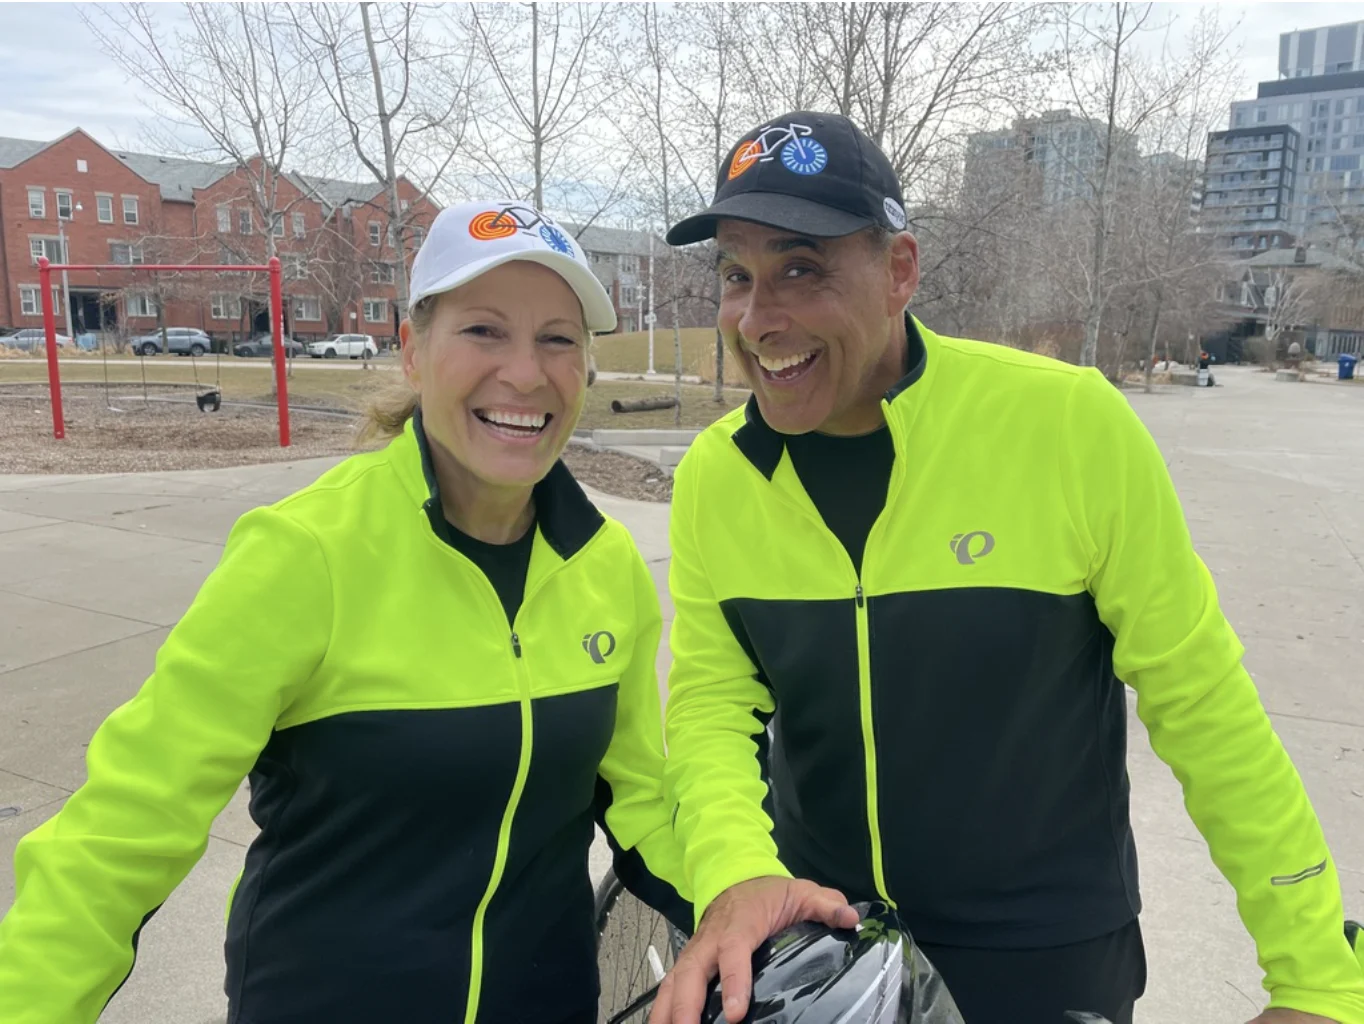 Hal Johnson and Joanne McLeod: The Weather Network